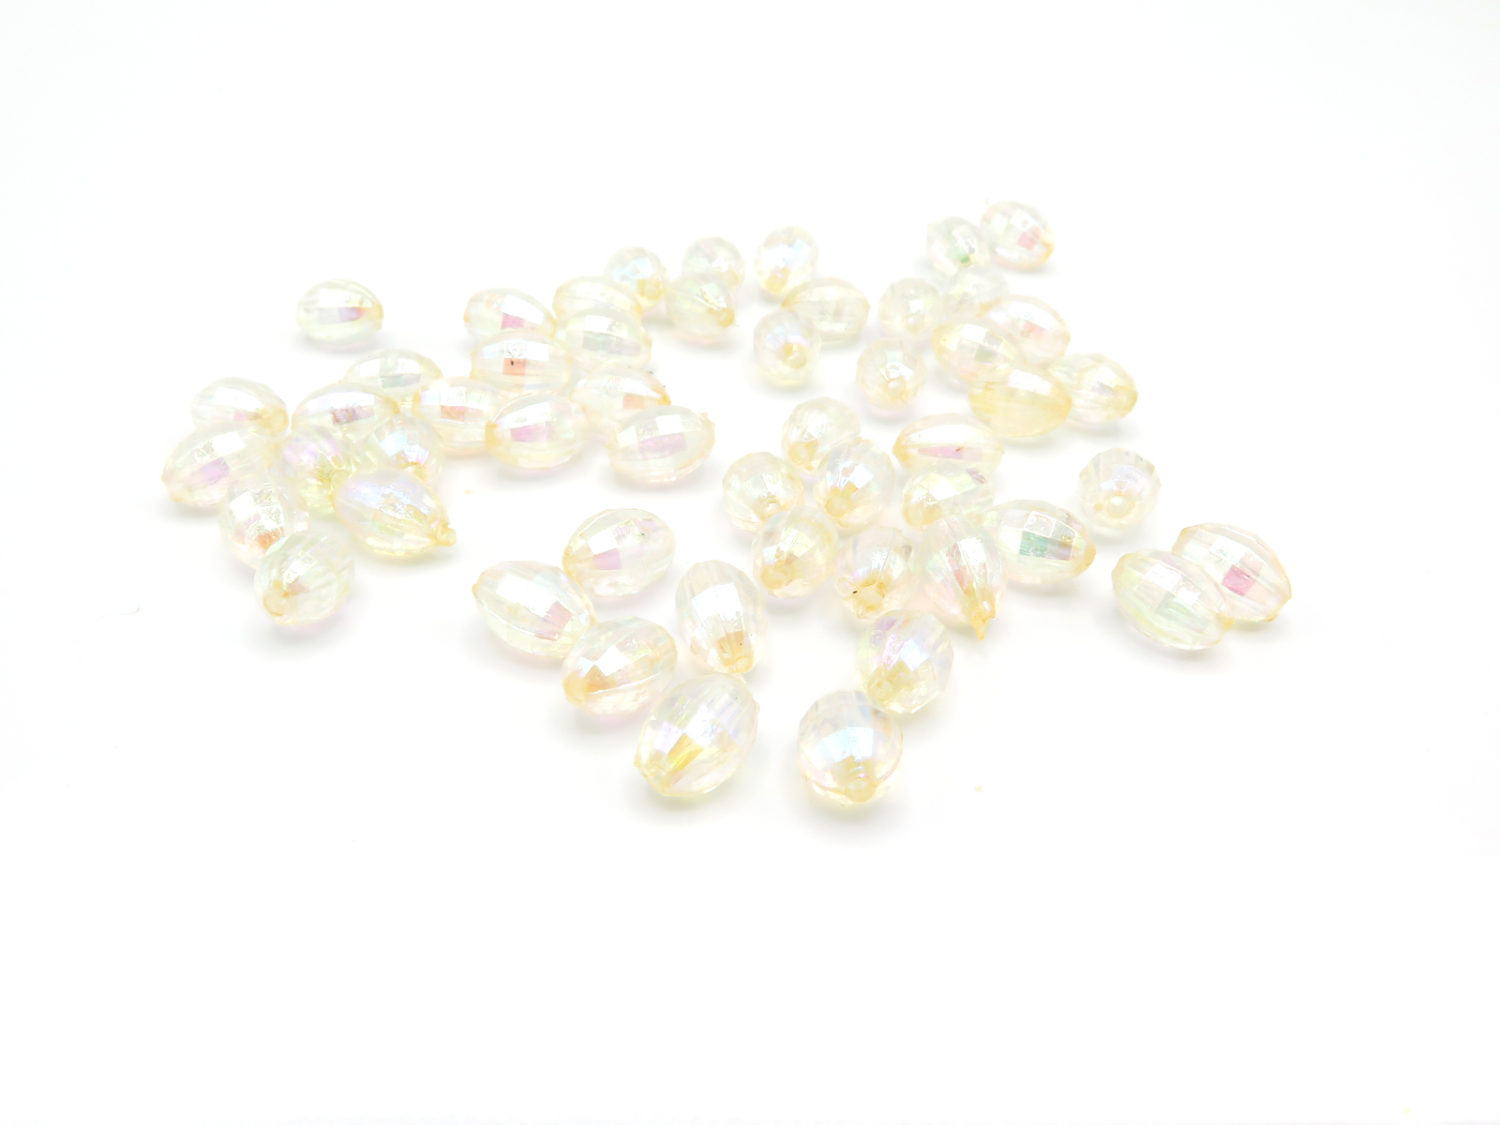 Clear Iridescent Football Shaped Disco Beads